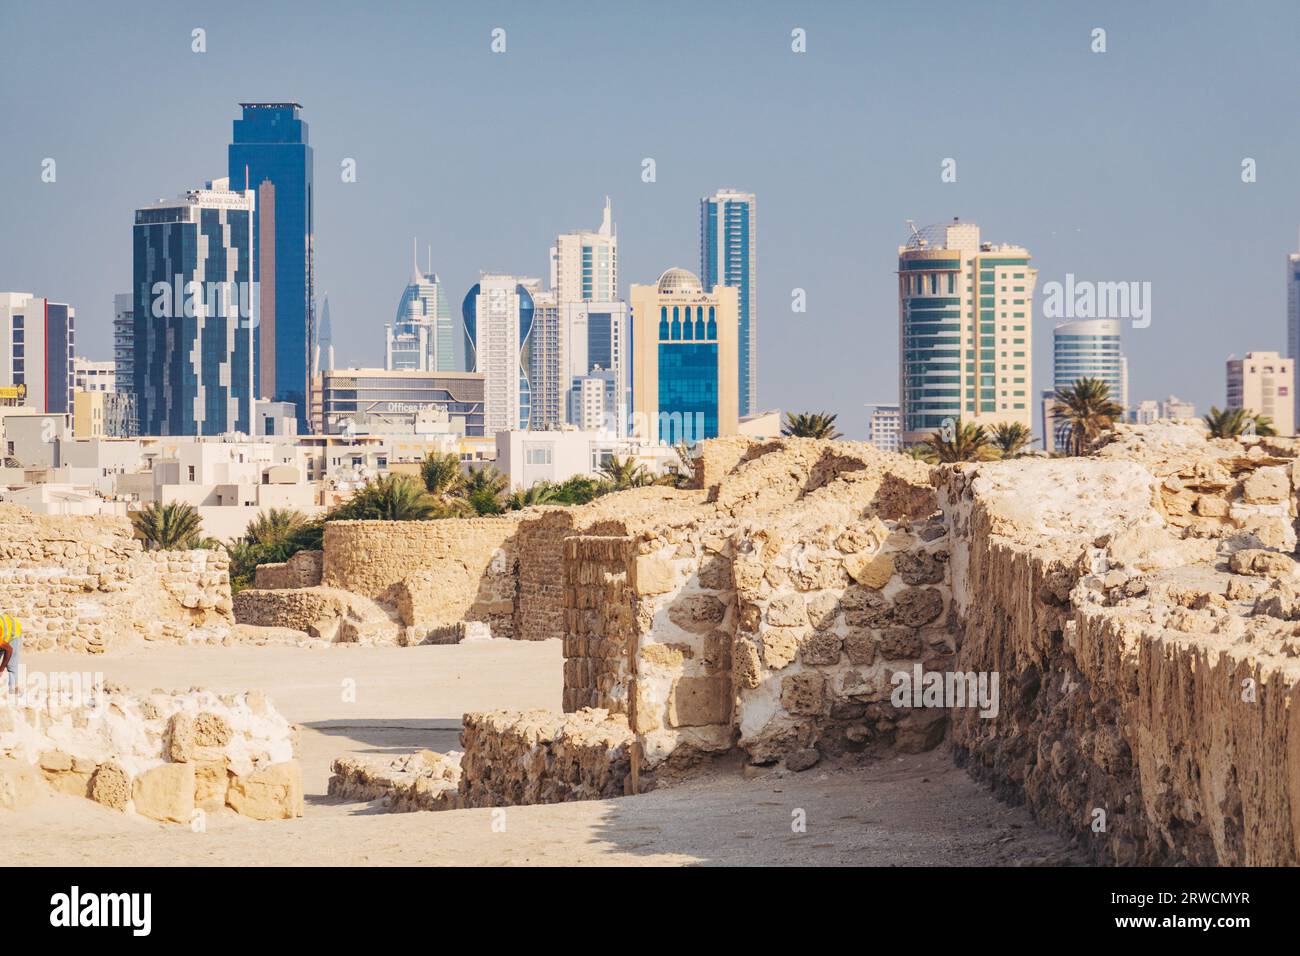 Old and new: the ruins of Bahrain Fort, dating back to 2300 BCE, against the modern skyline of downtown Manama city Stock Photo